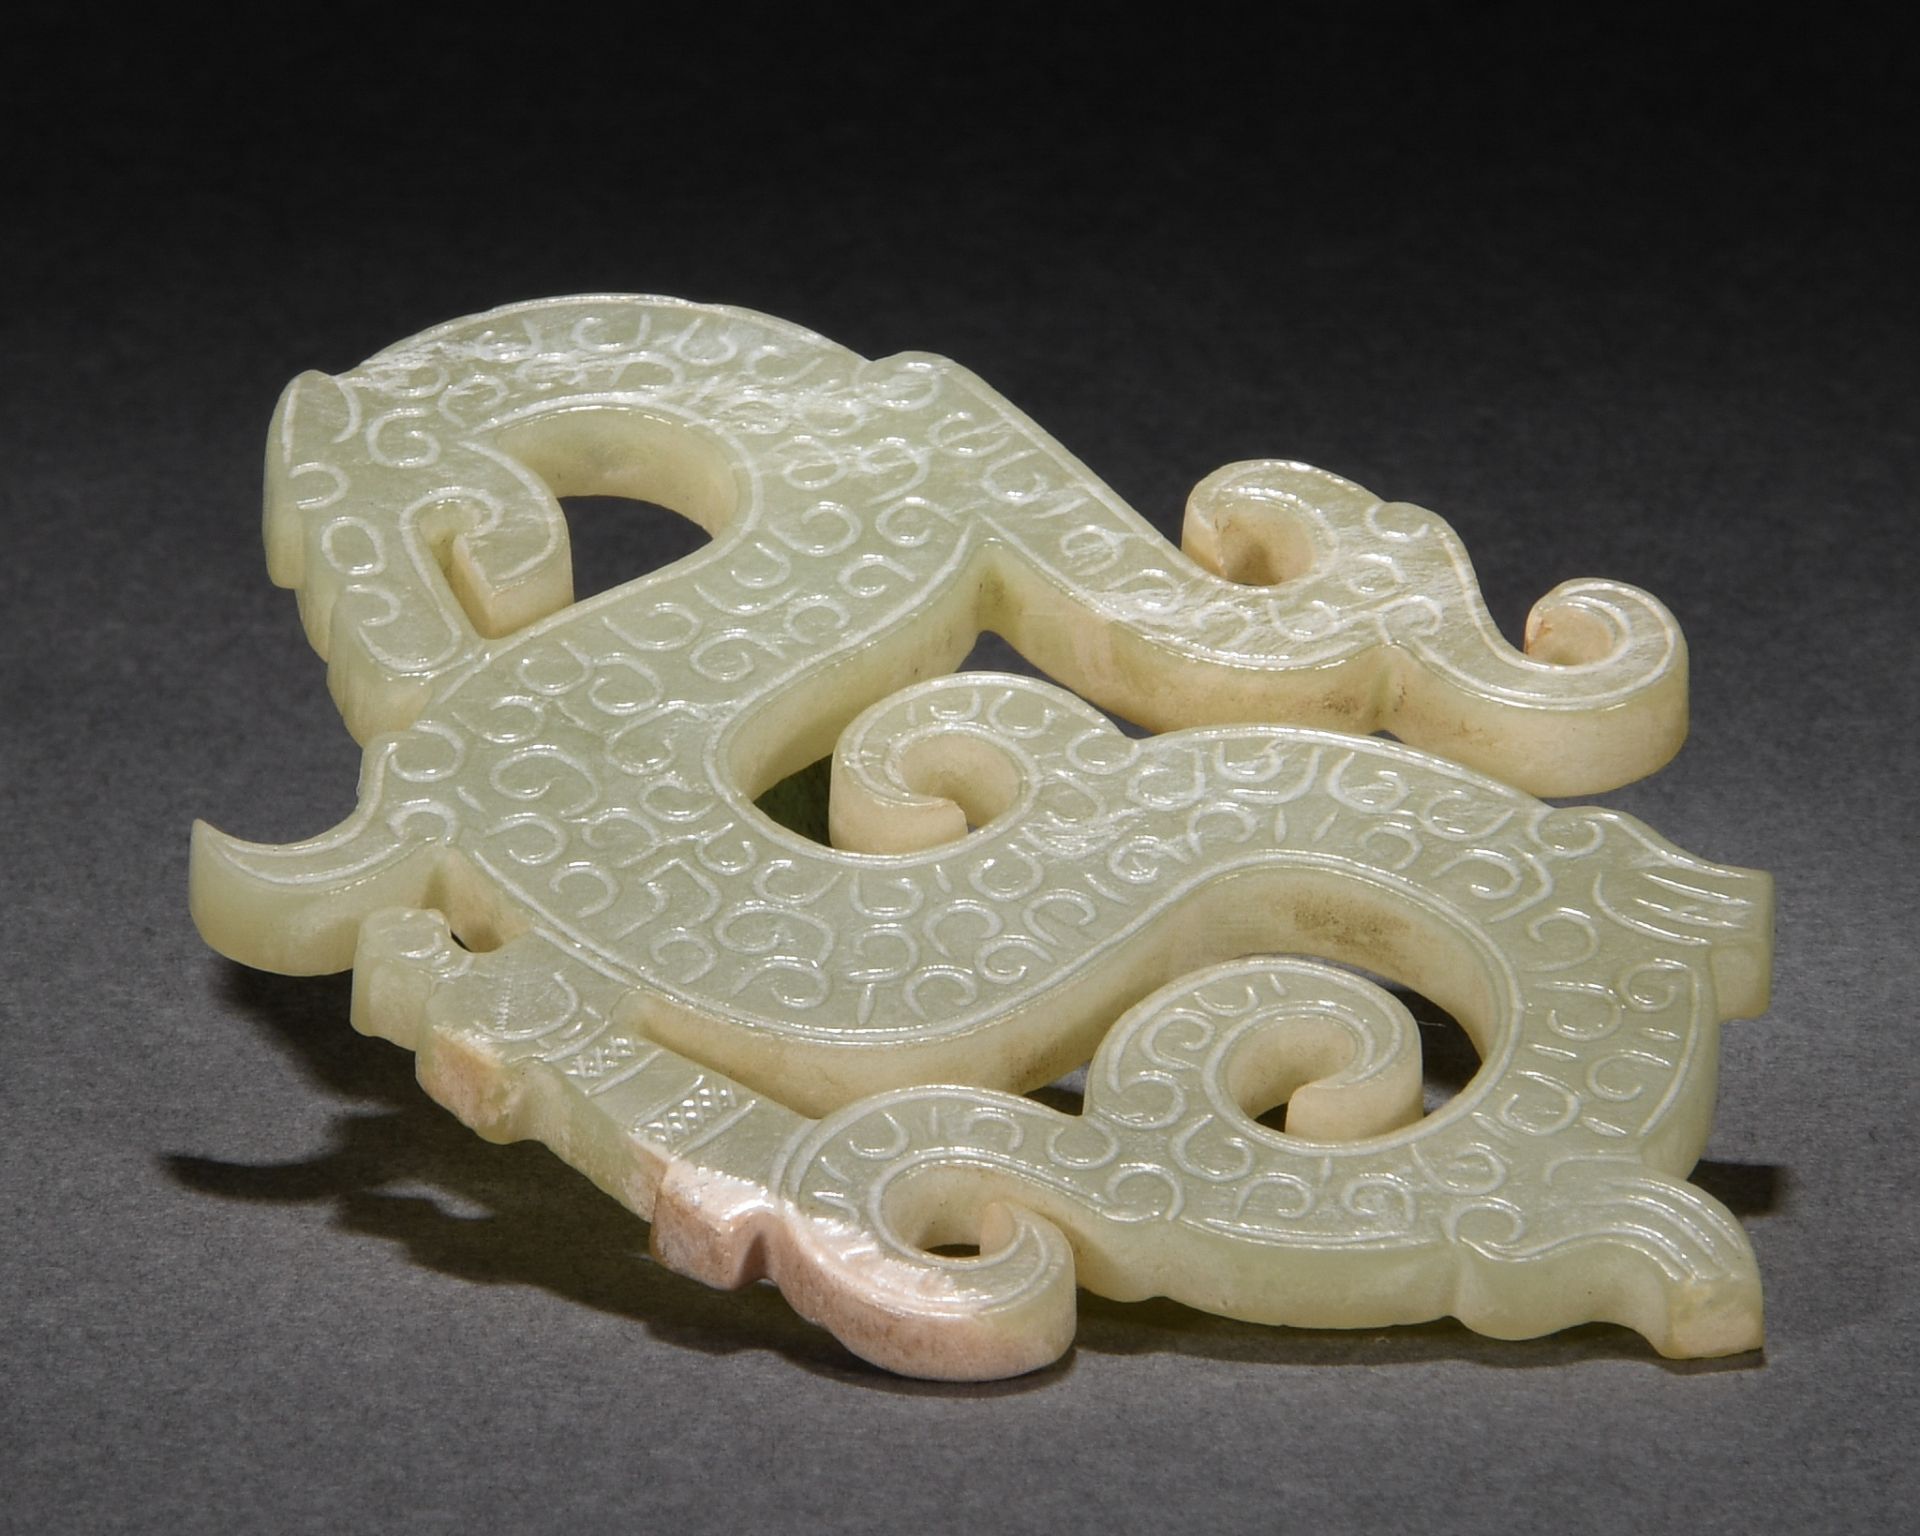 A Chinese Carved Jade Dragon Ornament - Image 7 of 7